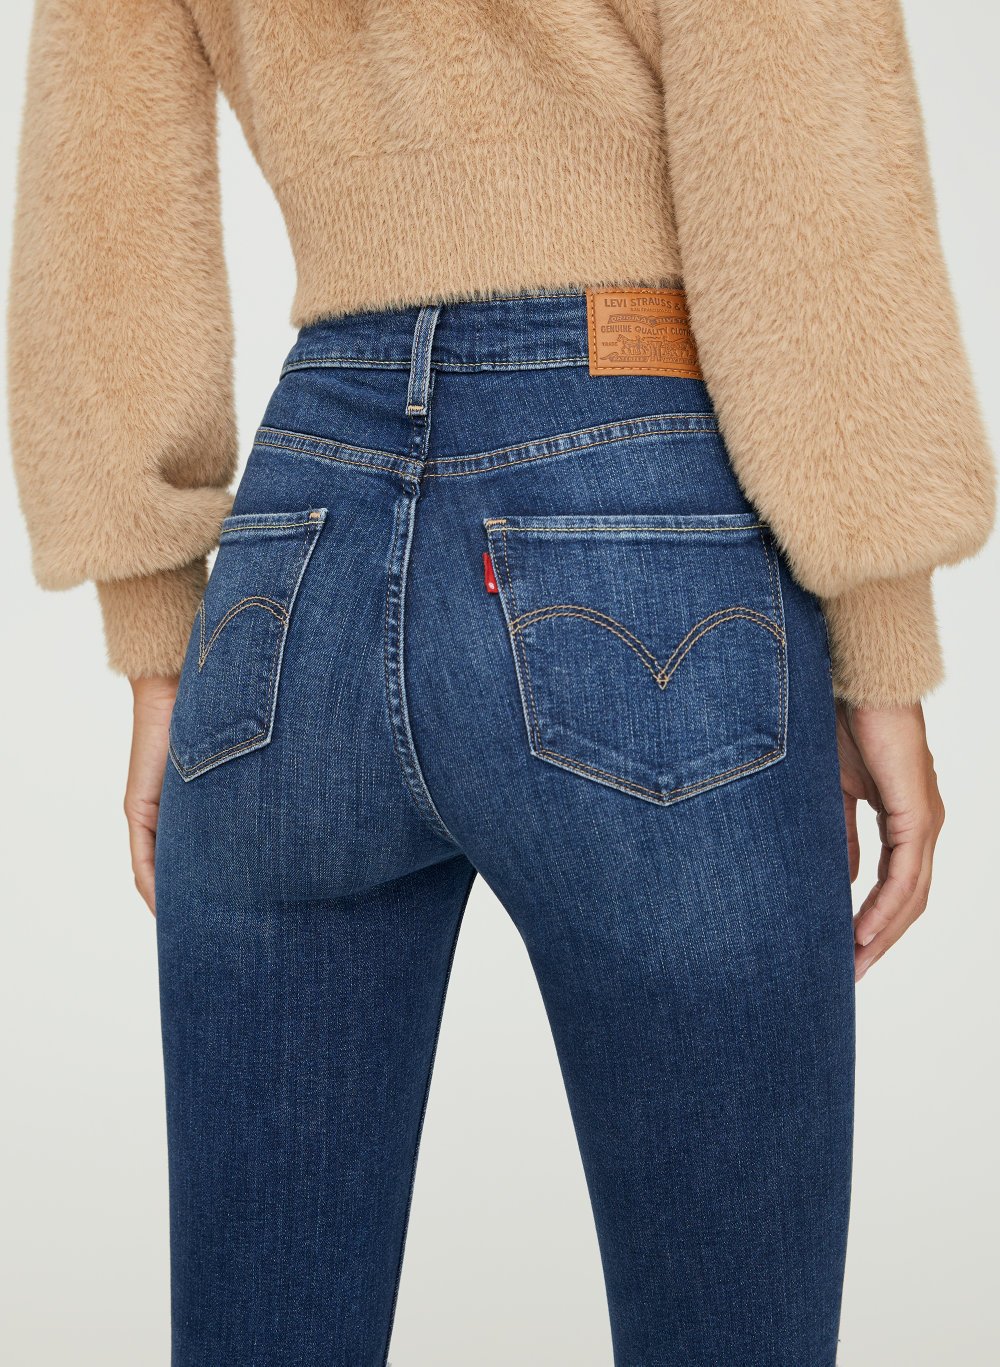 levis skinny high waisted jeans